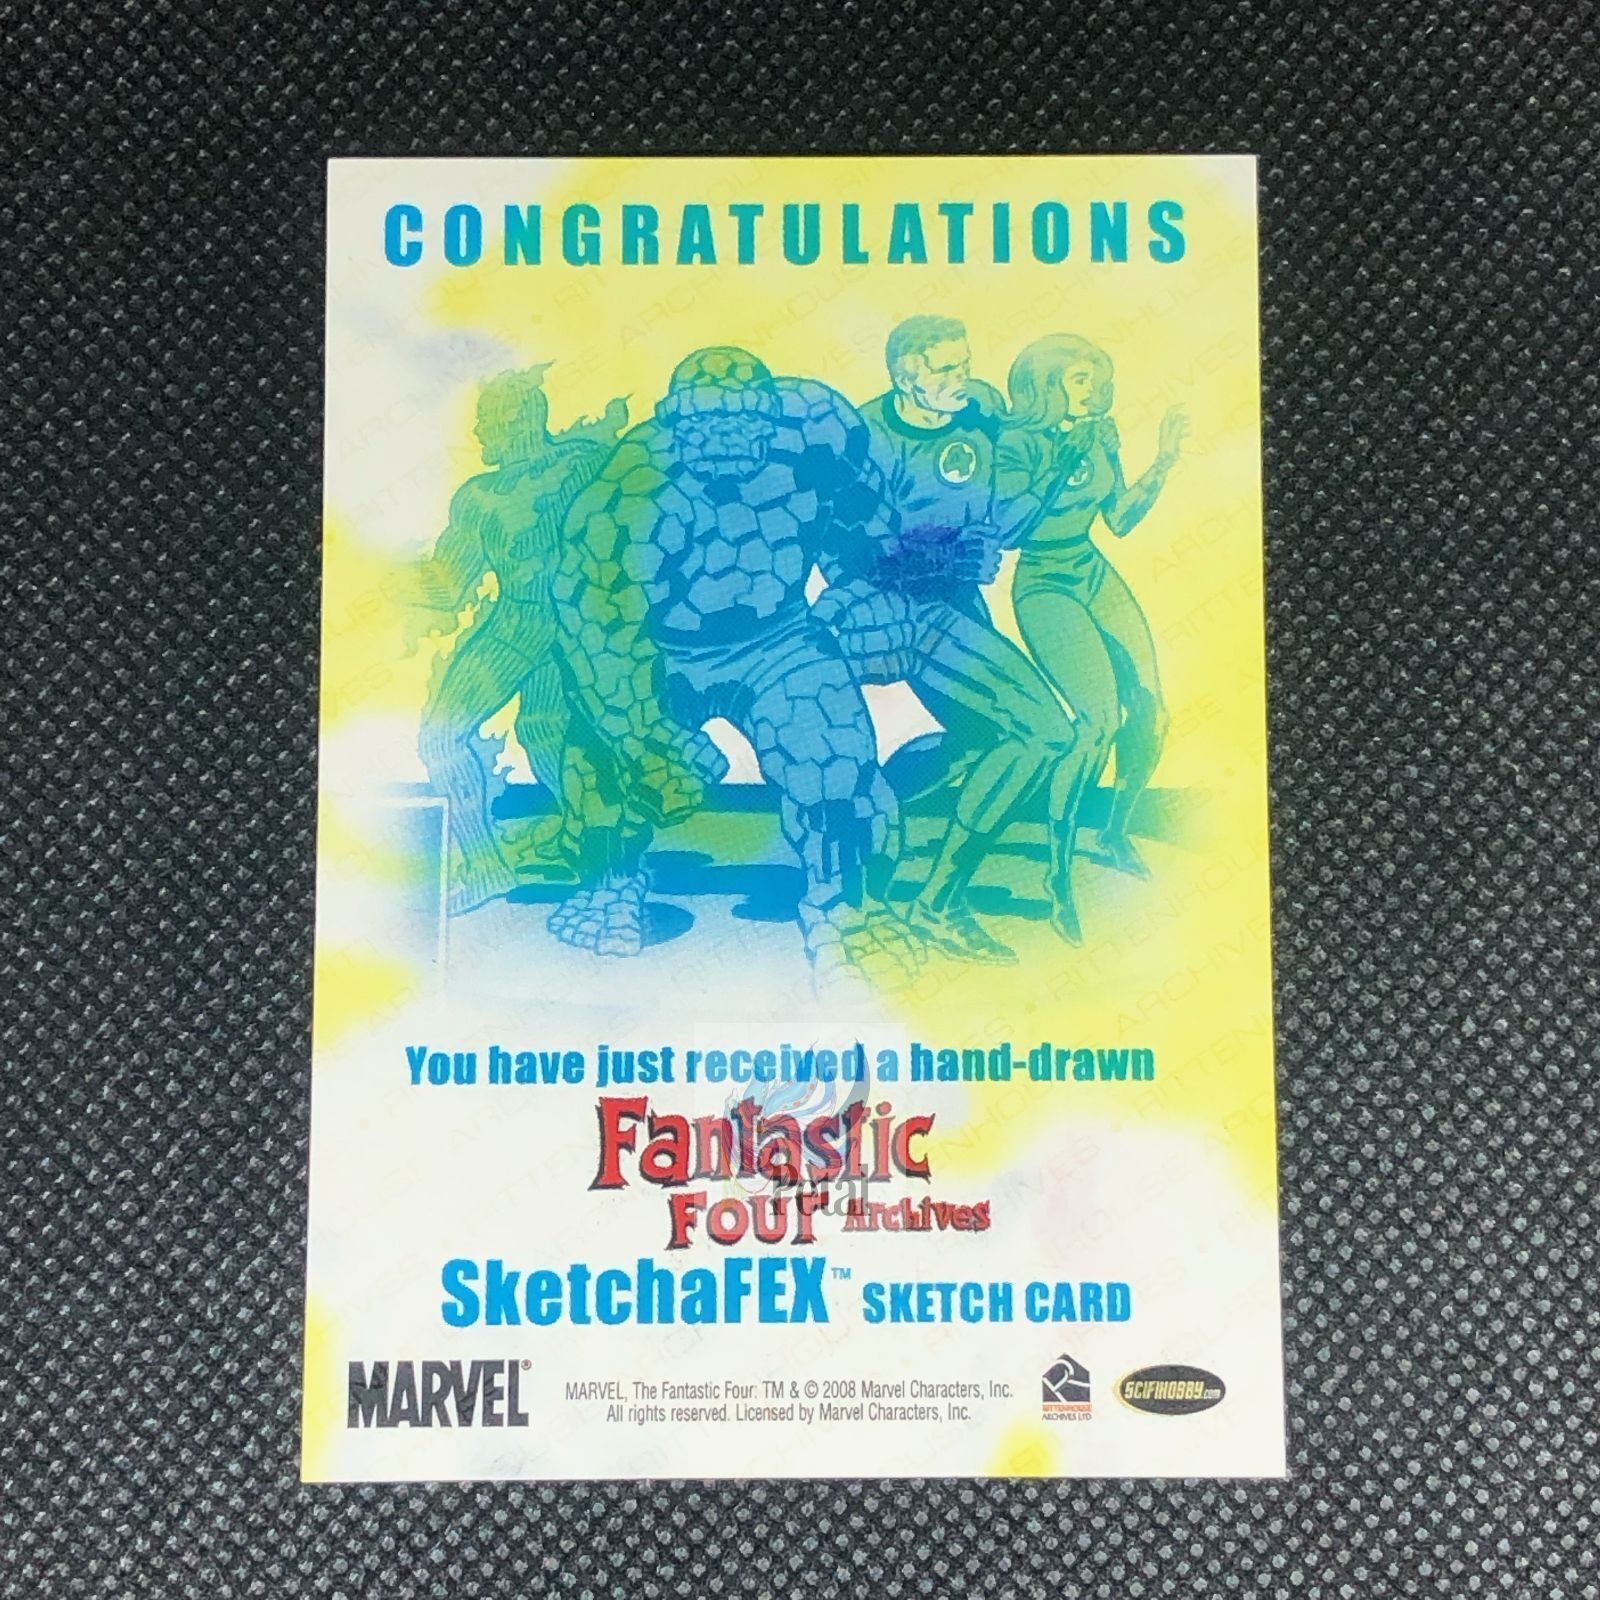 2008 Rittenhouse Marvel by John Watkins-Chow Fantastic Four Archives Sketch Card